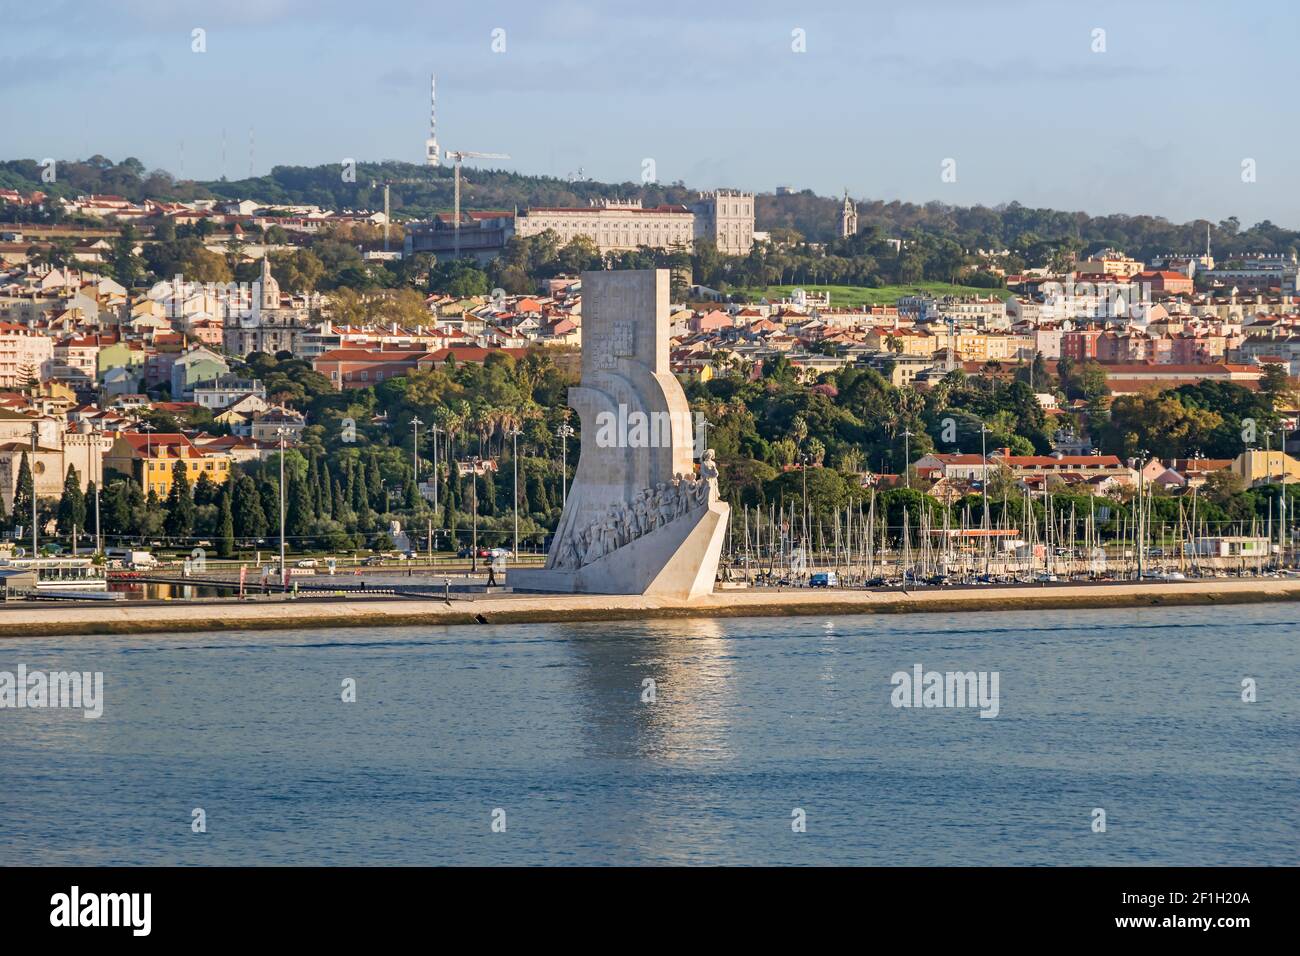 Lisbon, Portugal -  November 7, 2019: Northern bank of the Tagus River with Padrao dos Descobrimentos (Monument of the Discoveries) Stock Photo